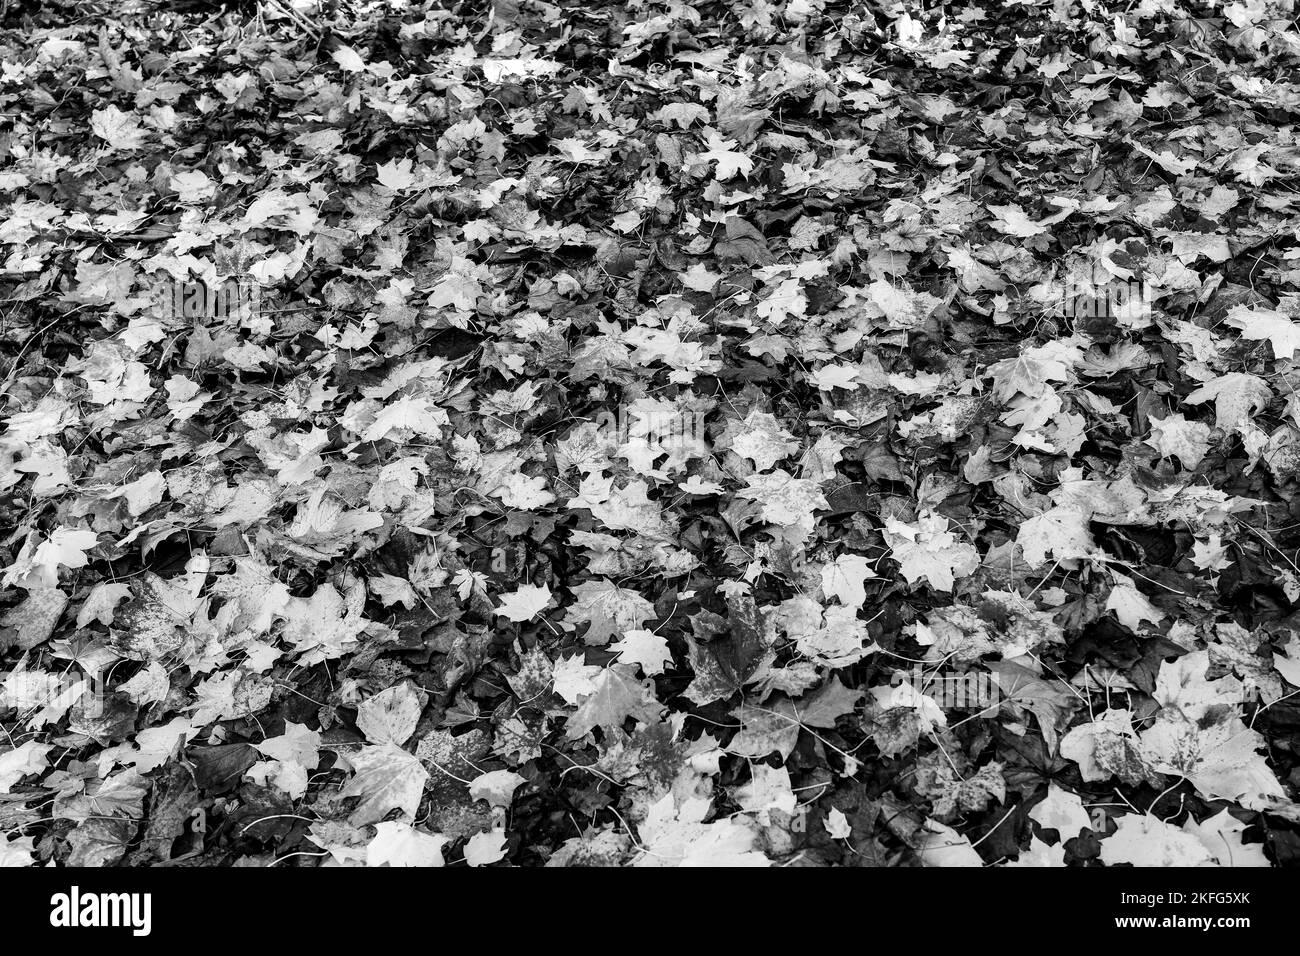 Yellow and brown autumn leaves background. Outdoor. Black and white backround image of fallen autumn leaves perfect for seasonal use. Space for text. Stock Photo